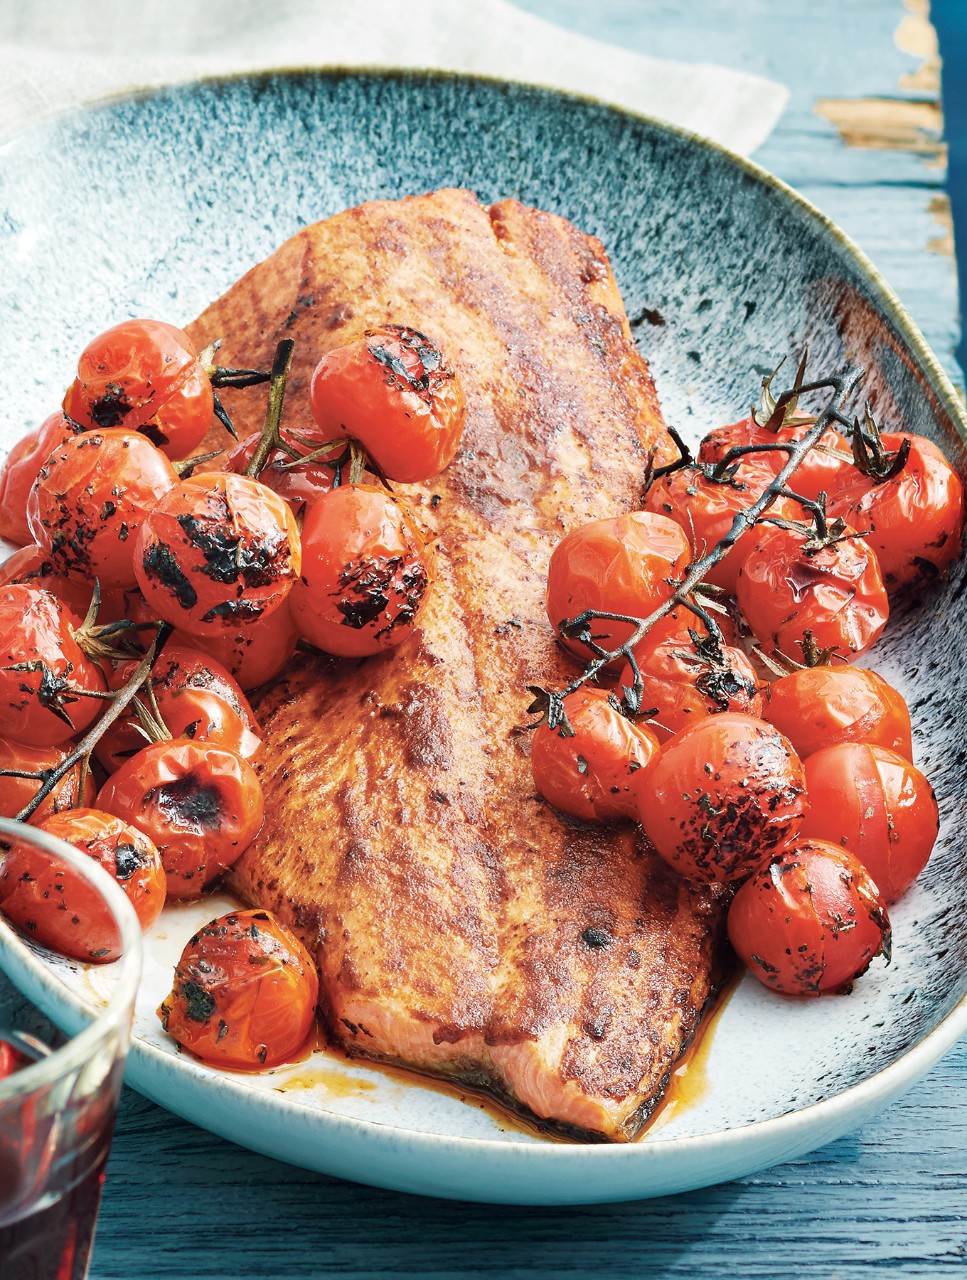 Barbecued Spicy Trout with Vine-Ripened Tomatoes